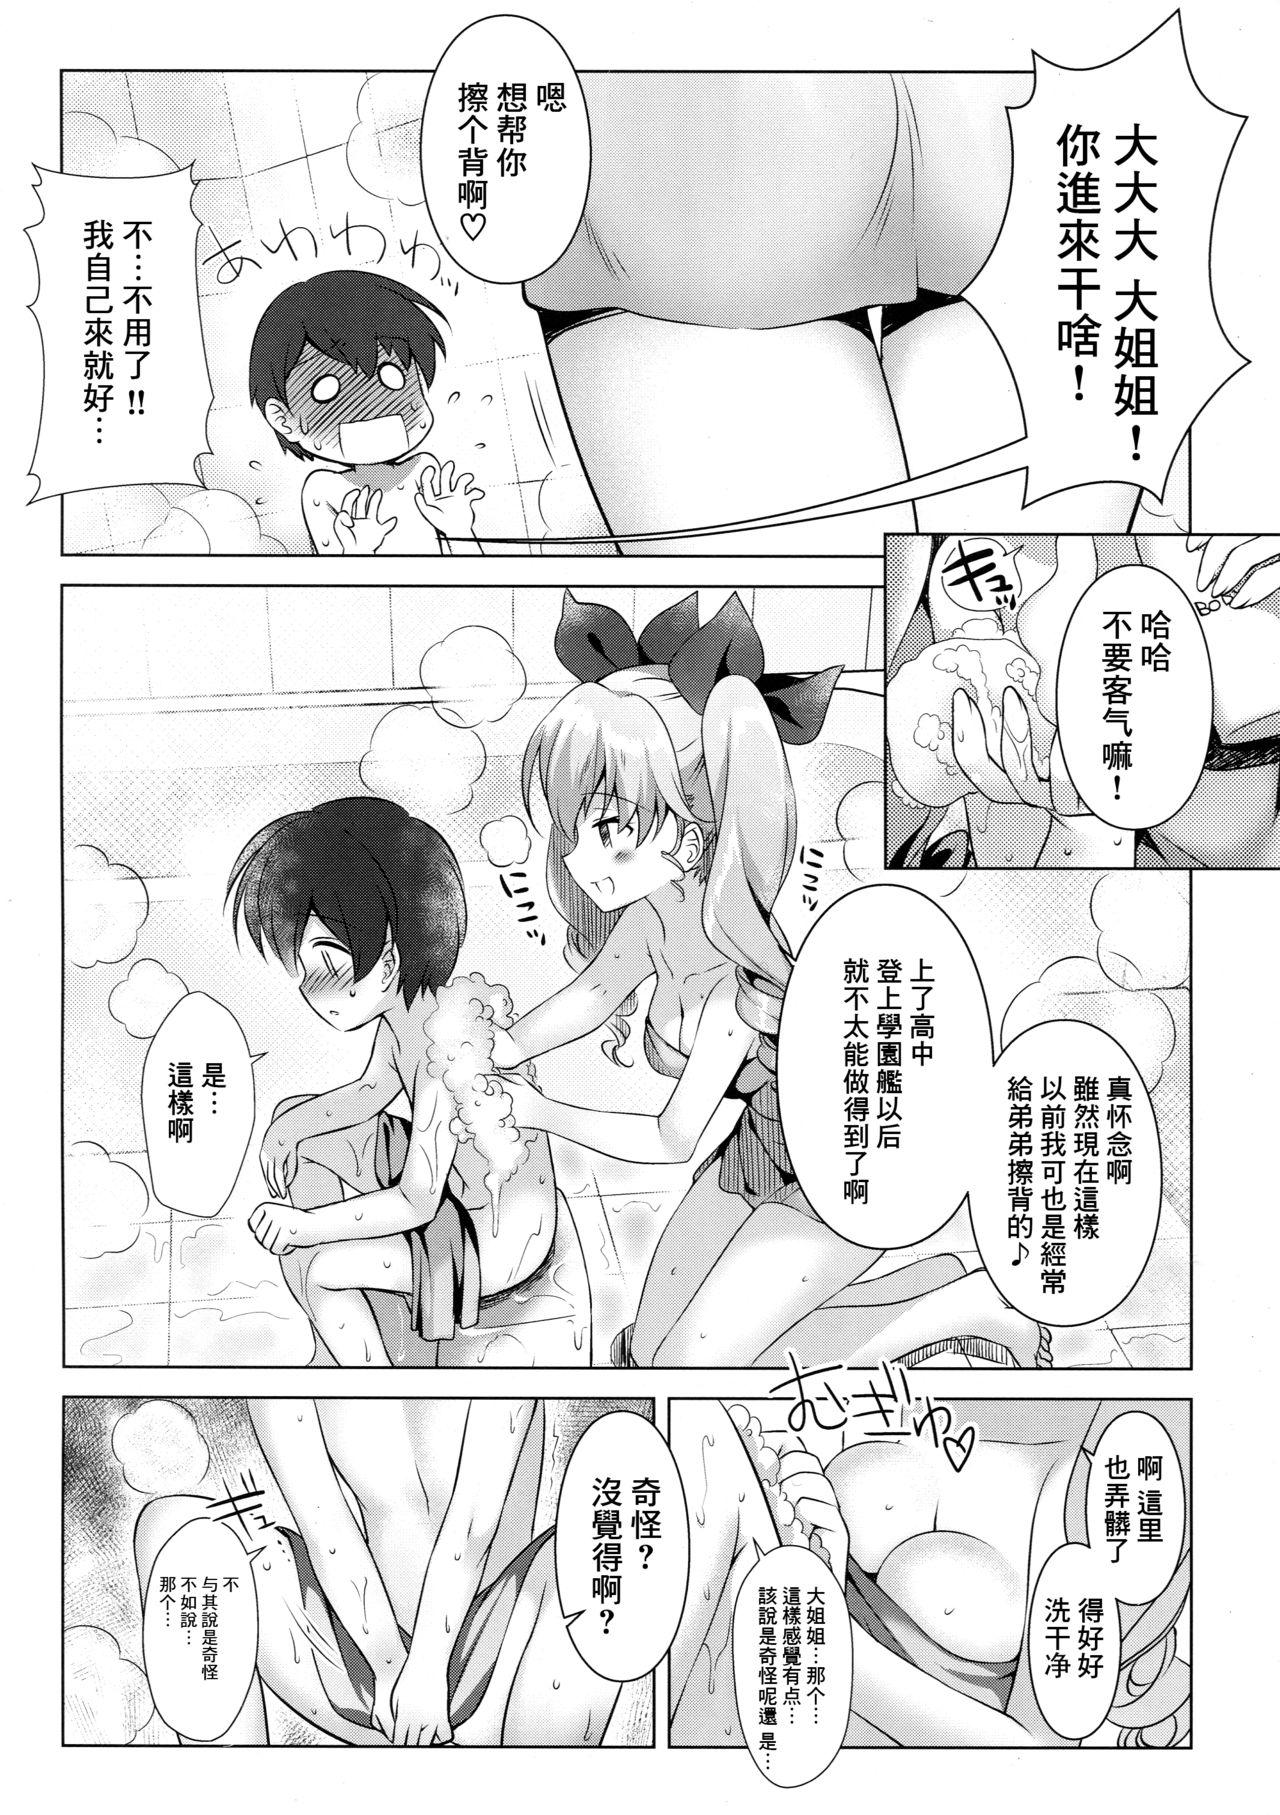 Euro Porn Anchovy Panic! - Girls und panzer Barely 18 Porn - Page 6